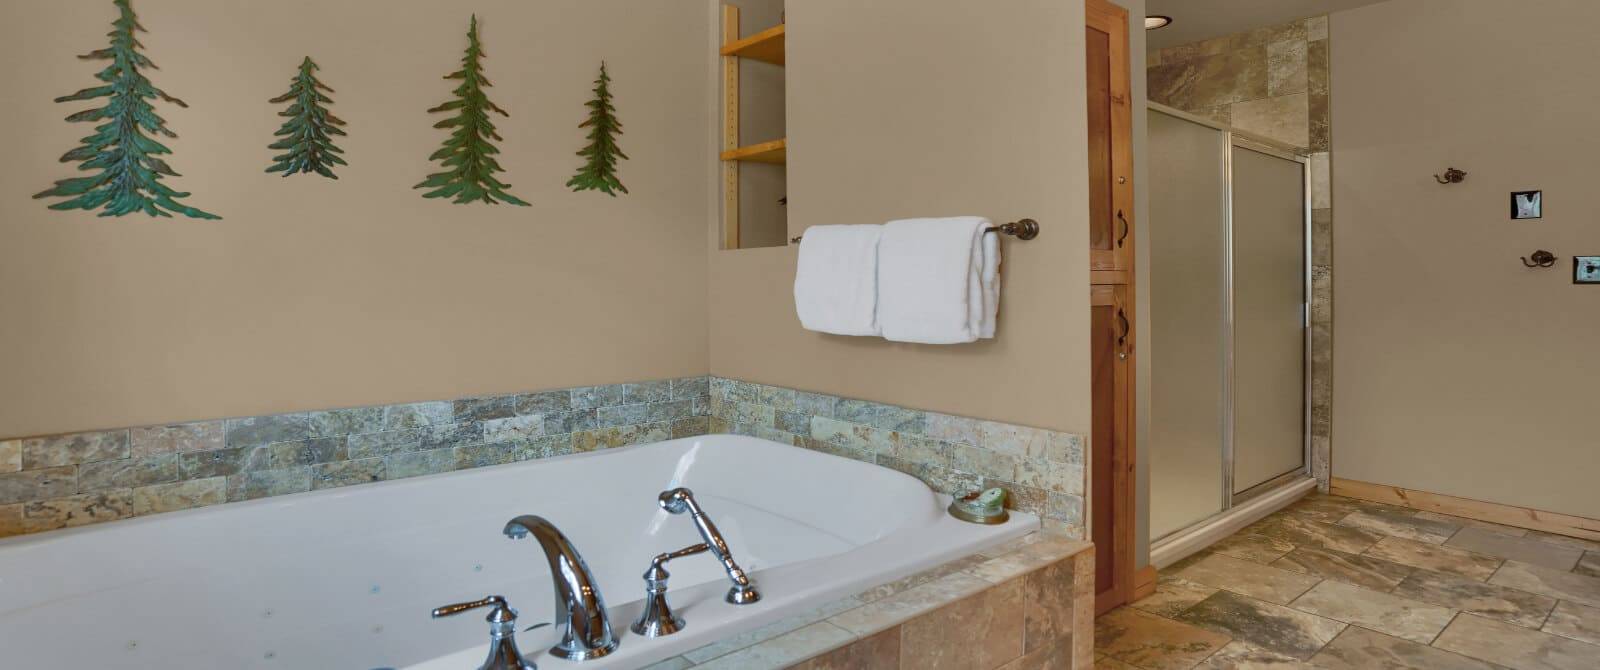 jetted tub with metal trees on the wall, and a large shower at the end of the wall.